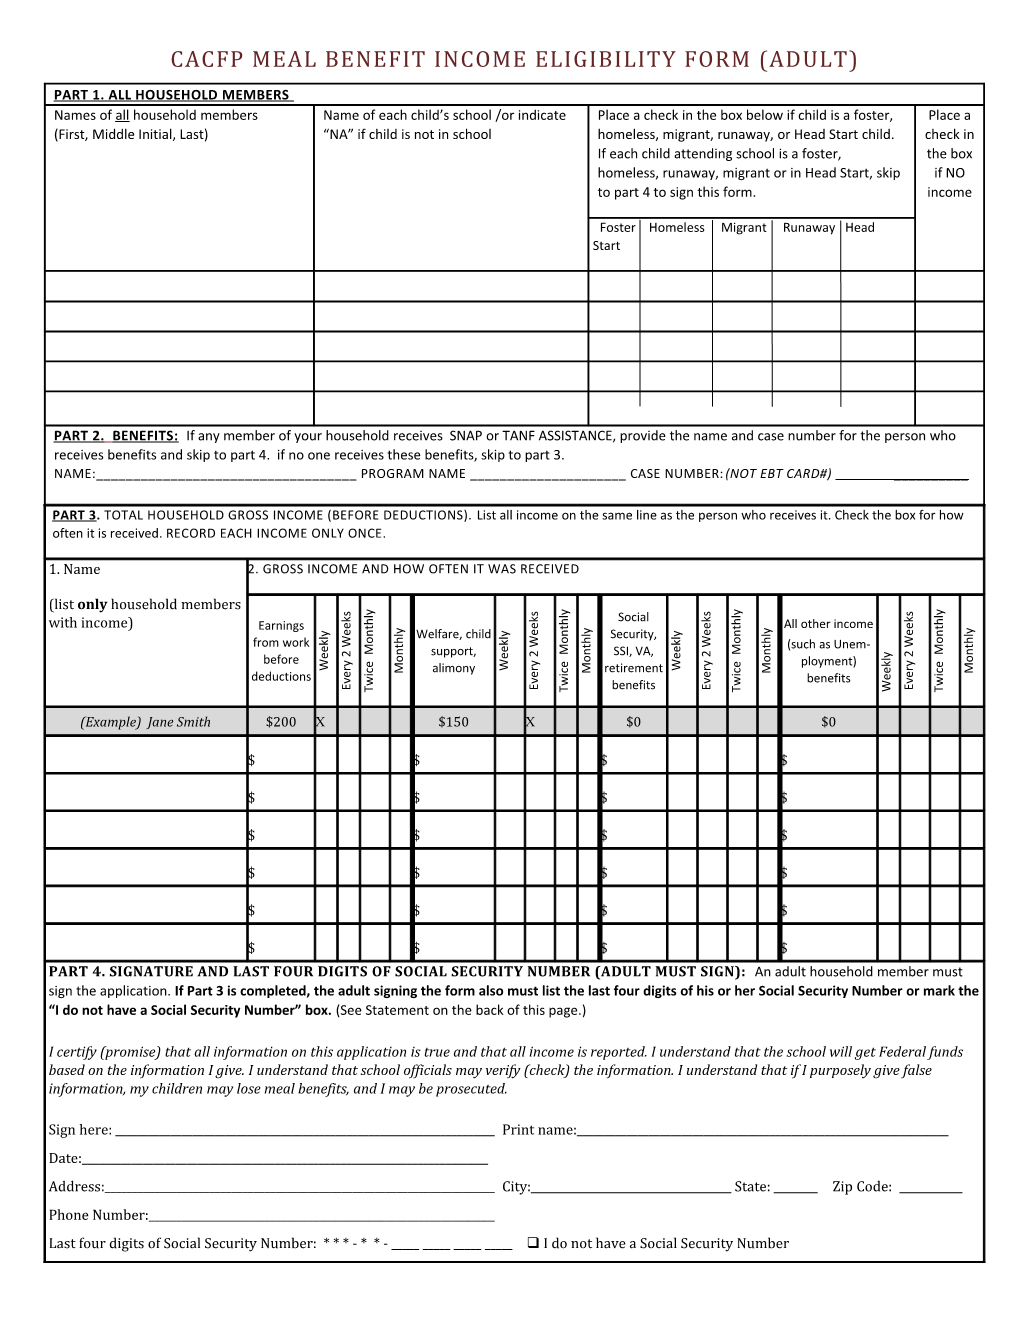 CACFP Meal Benefit Income Eligibility Form (ADULT)